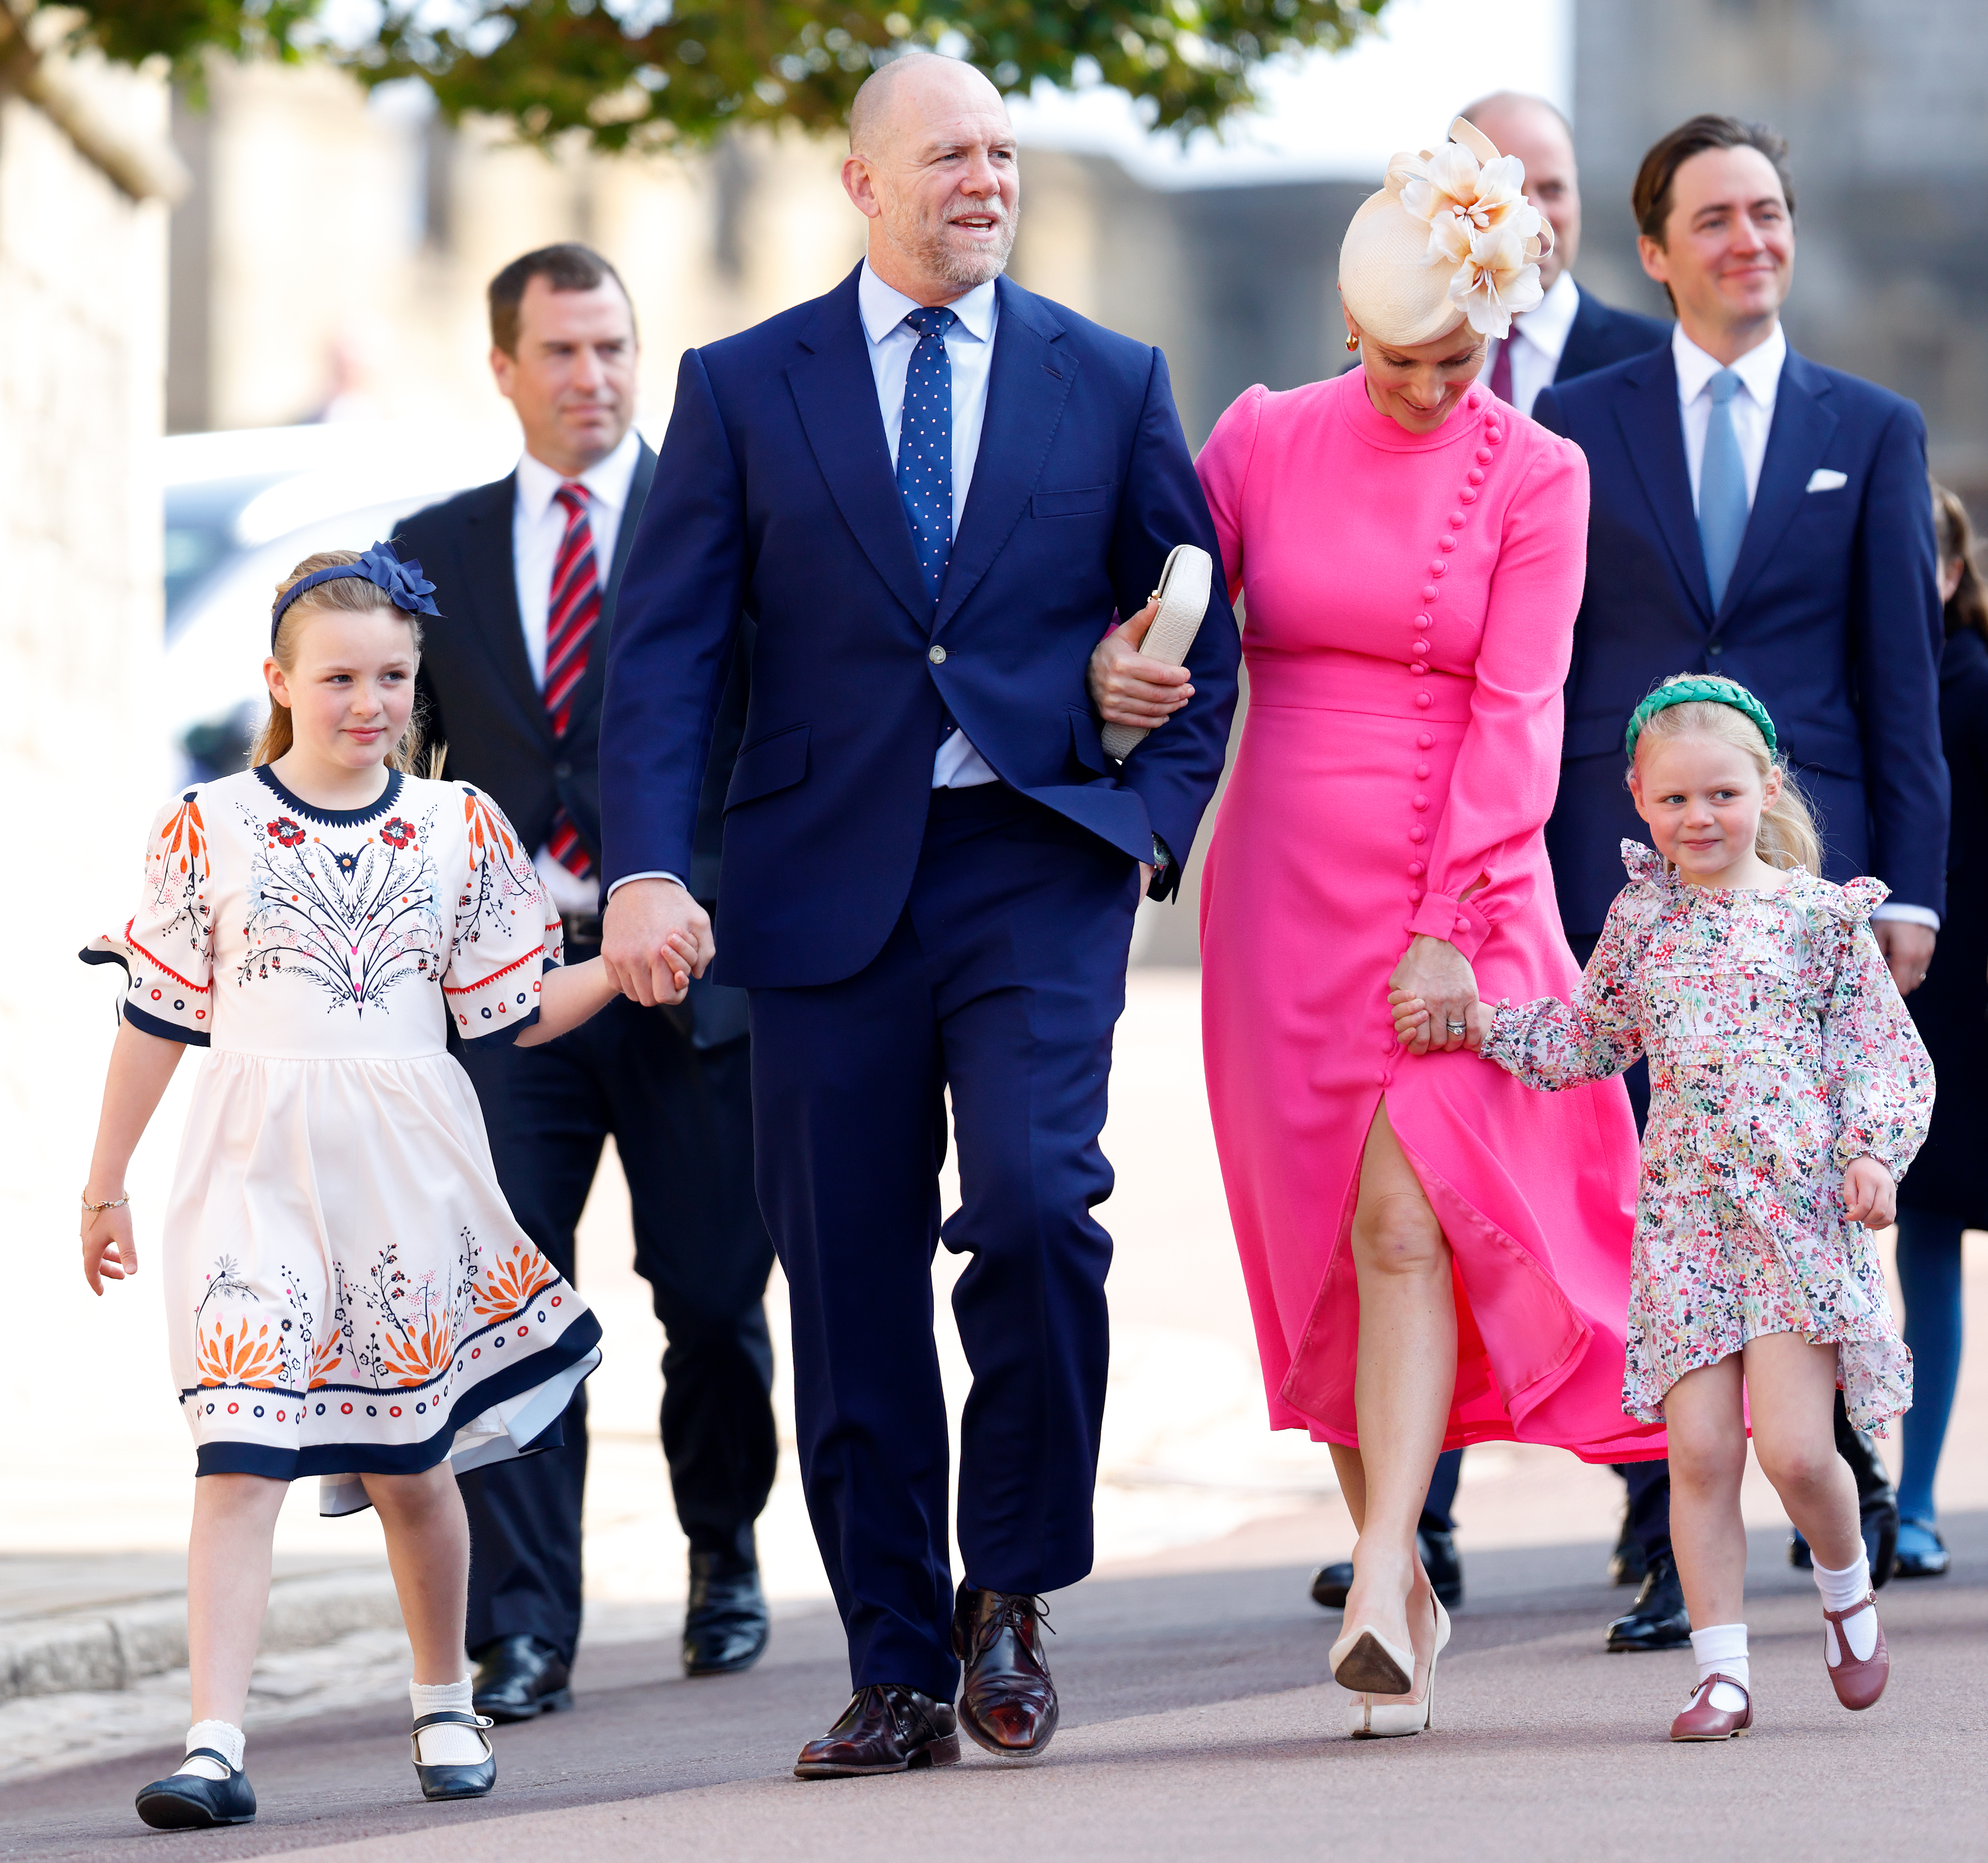 <p>Zara Tindell's eldest daughter with husband Mike Tindall, a former rugby star, is Mia Tindall (left) -- she's 22nd in line for the British throne. Little sister Lena (right) -- who was born in 2018 -- is 22nd in line.</p>